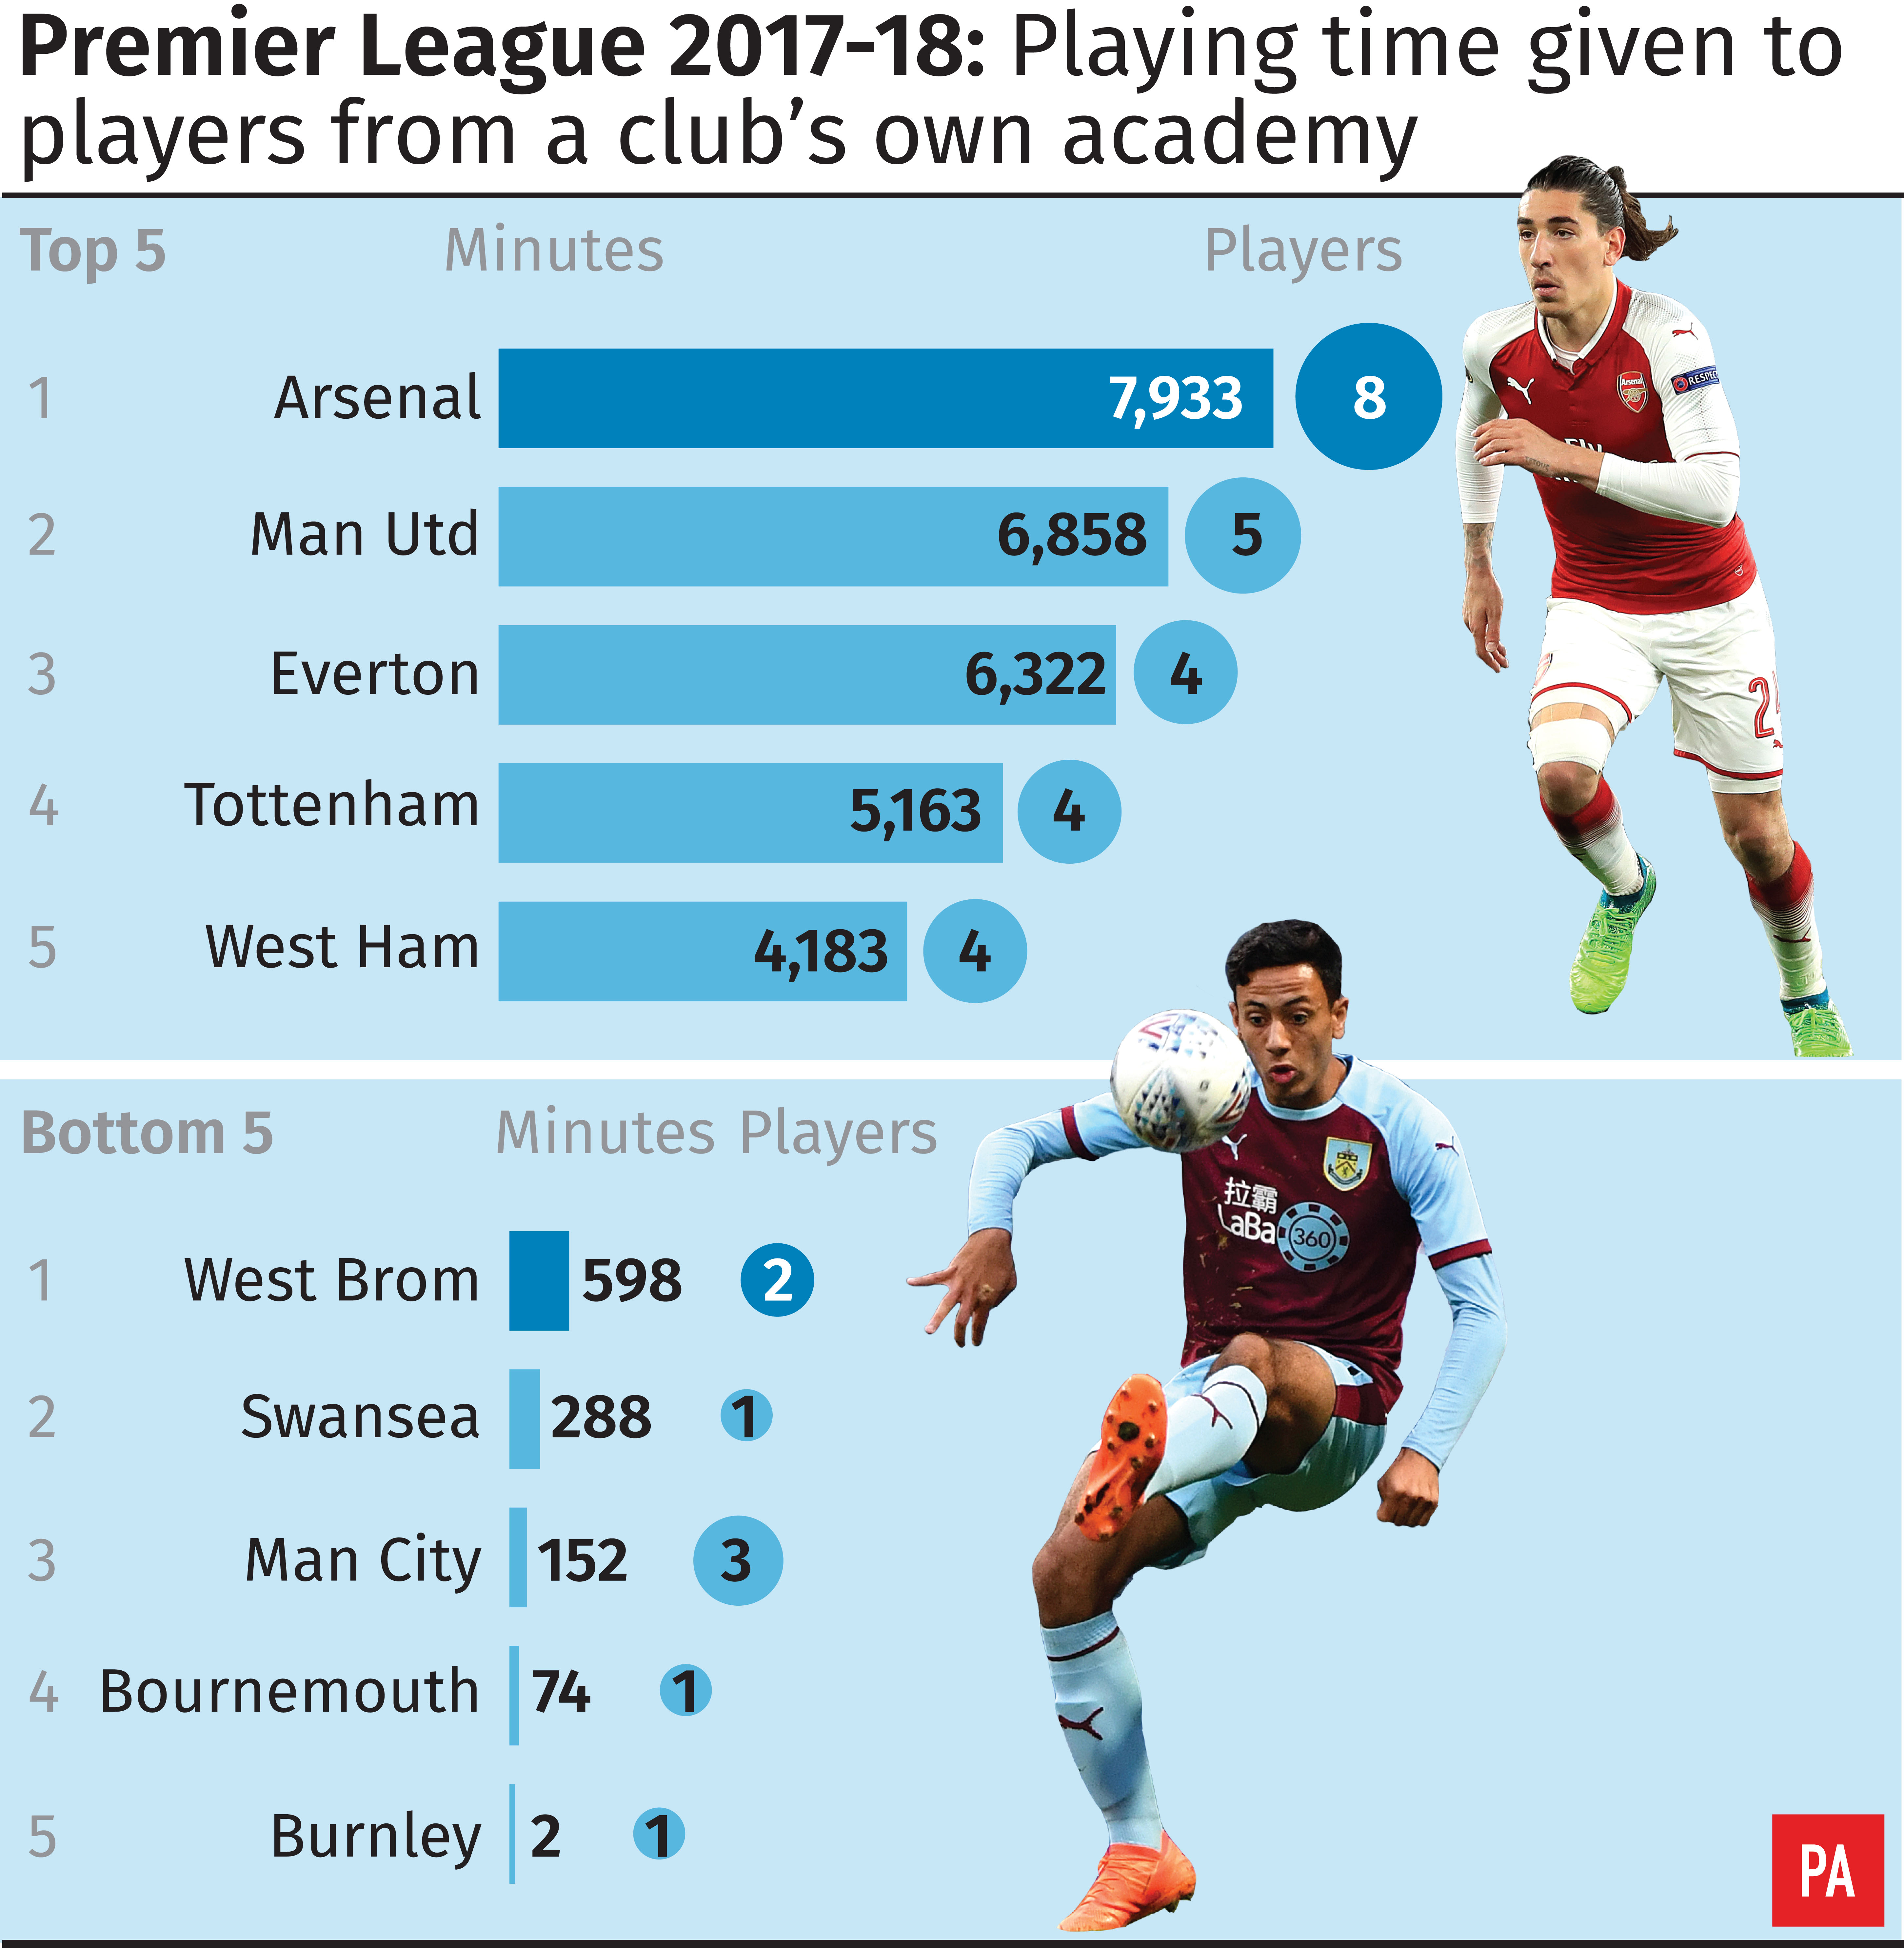 Playing time given by Premier League teams to graduates of their own academy